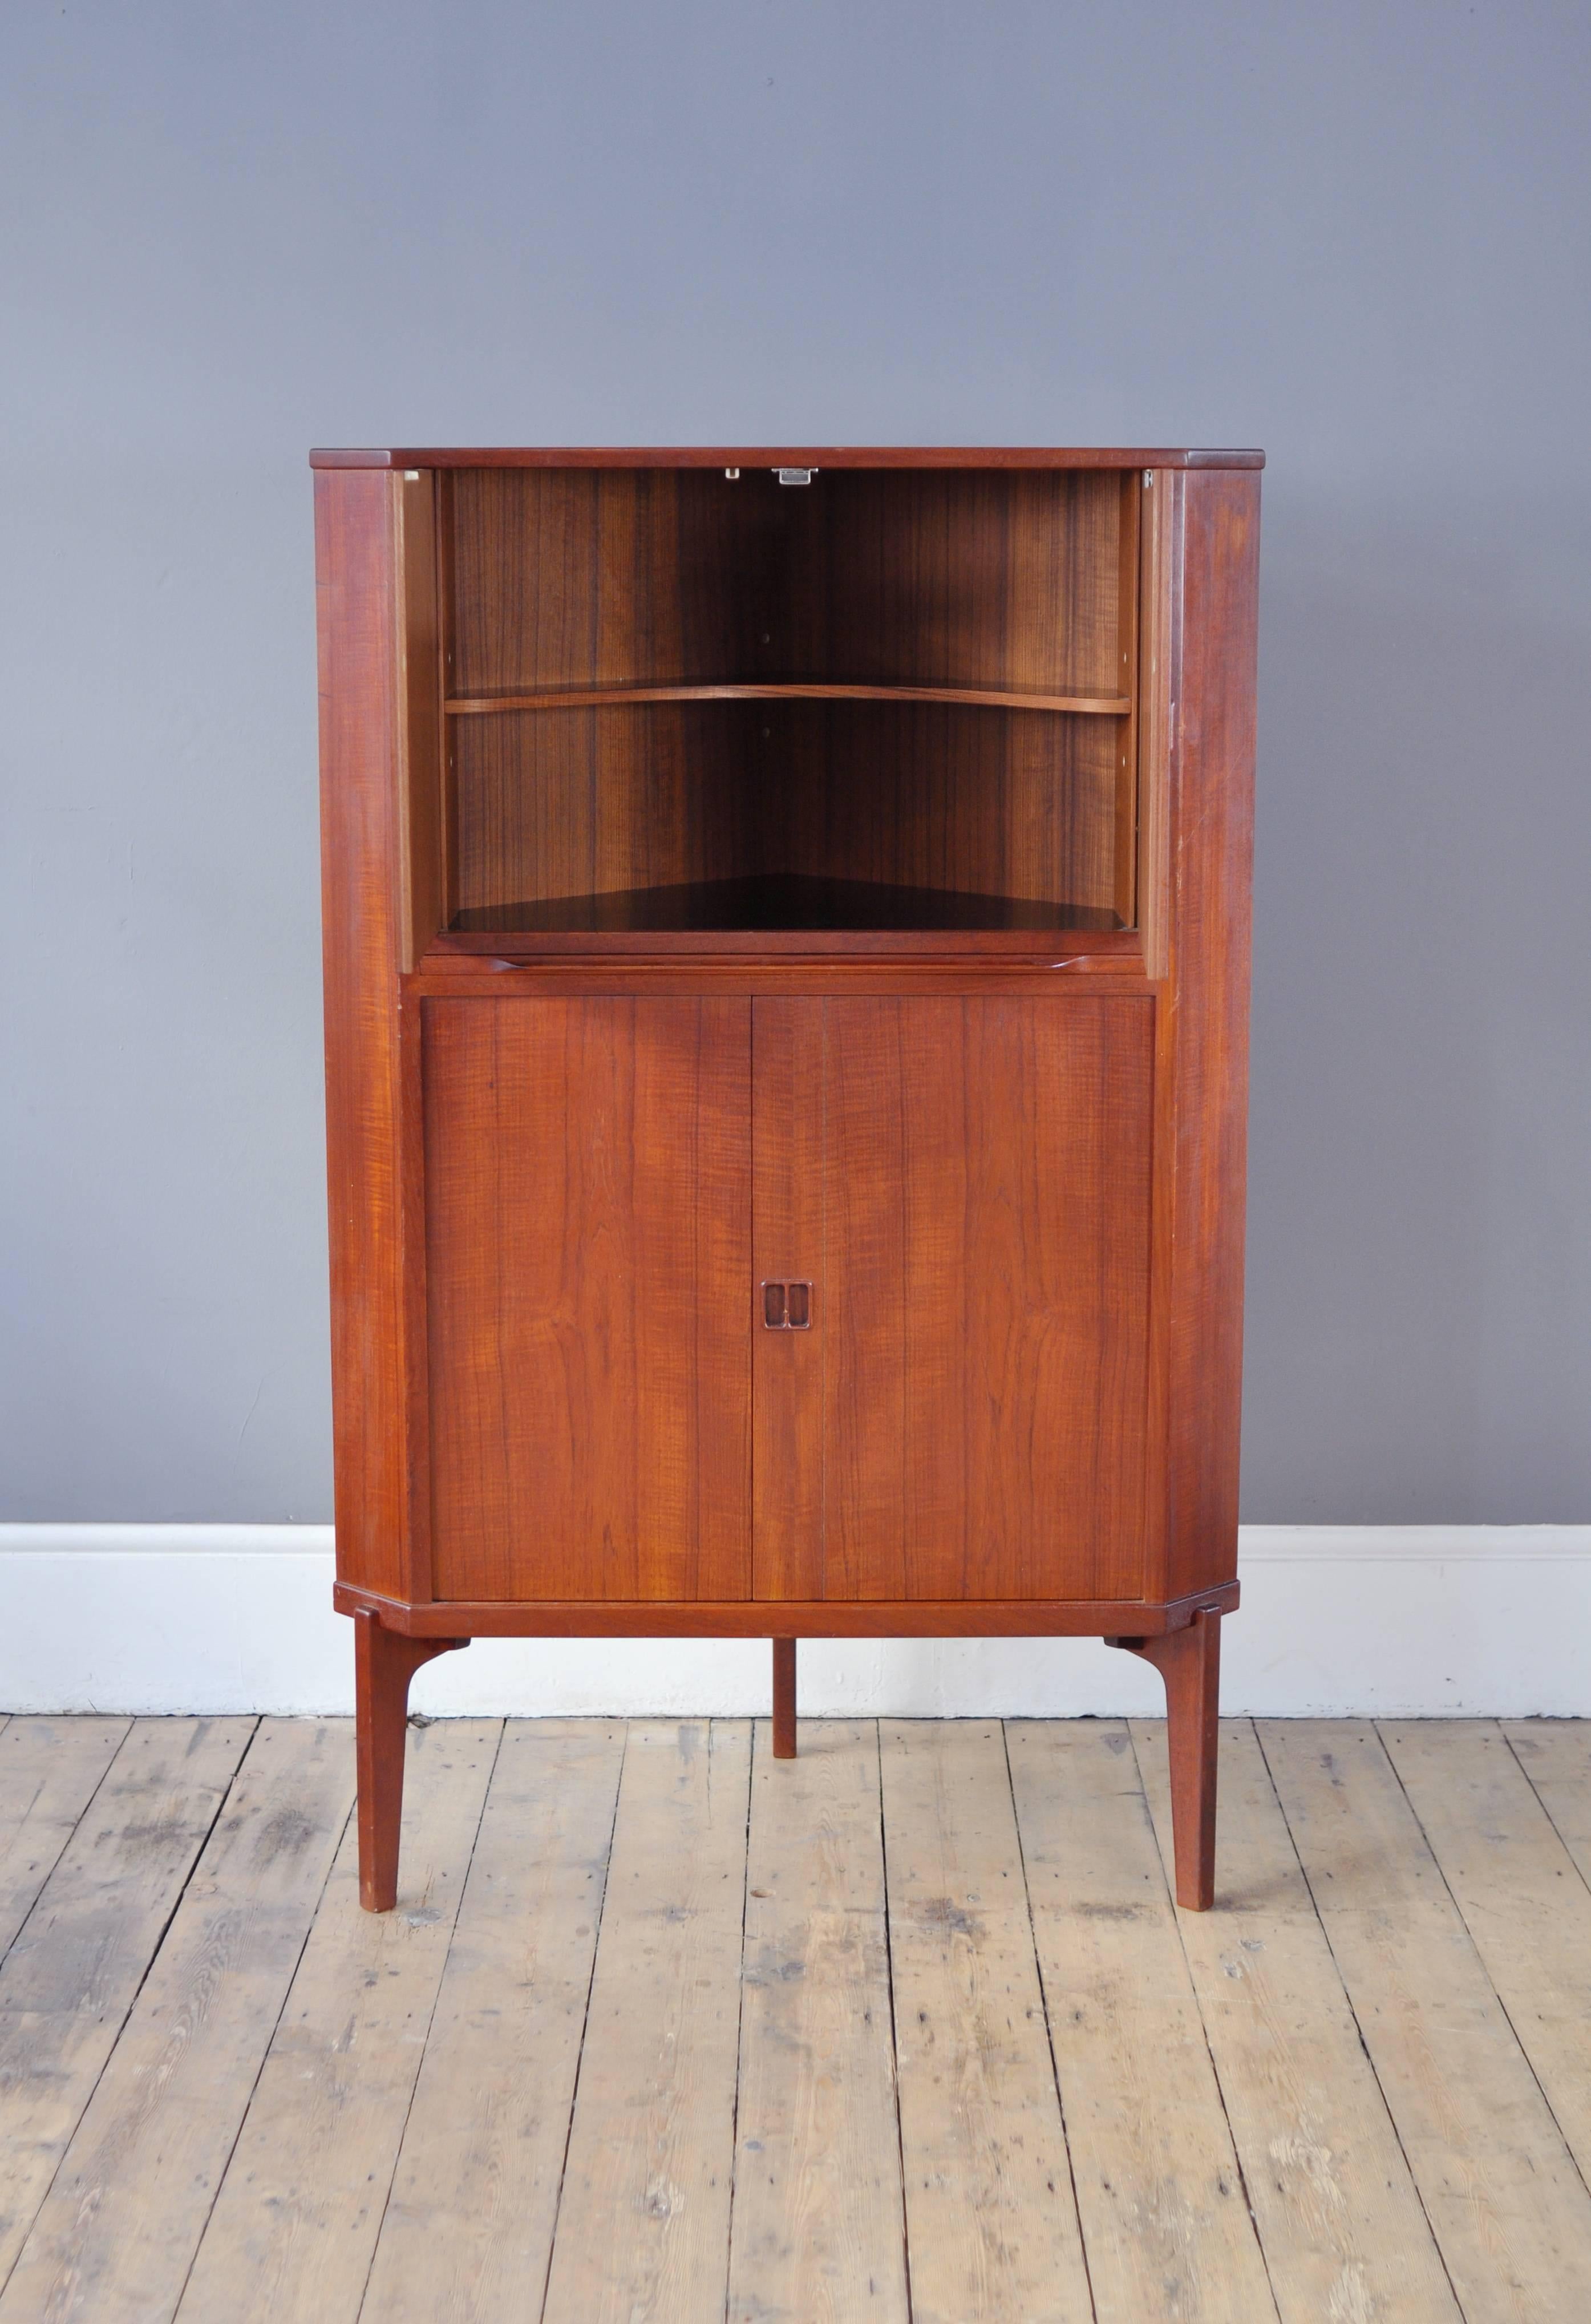 Unusual corner drinks cabinet in teak, with a pull out shelf. Featuring lovely square handles and spacious storage.